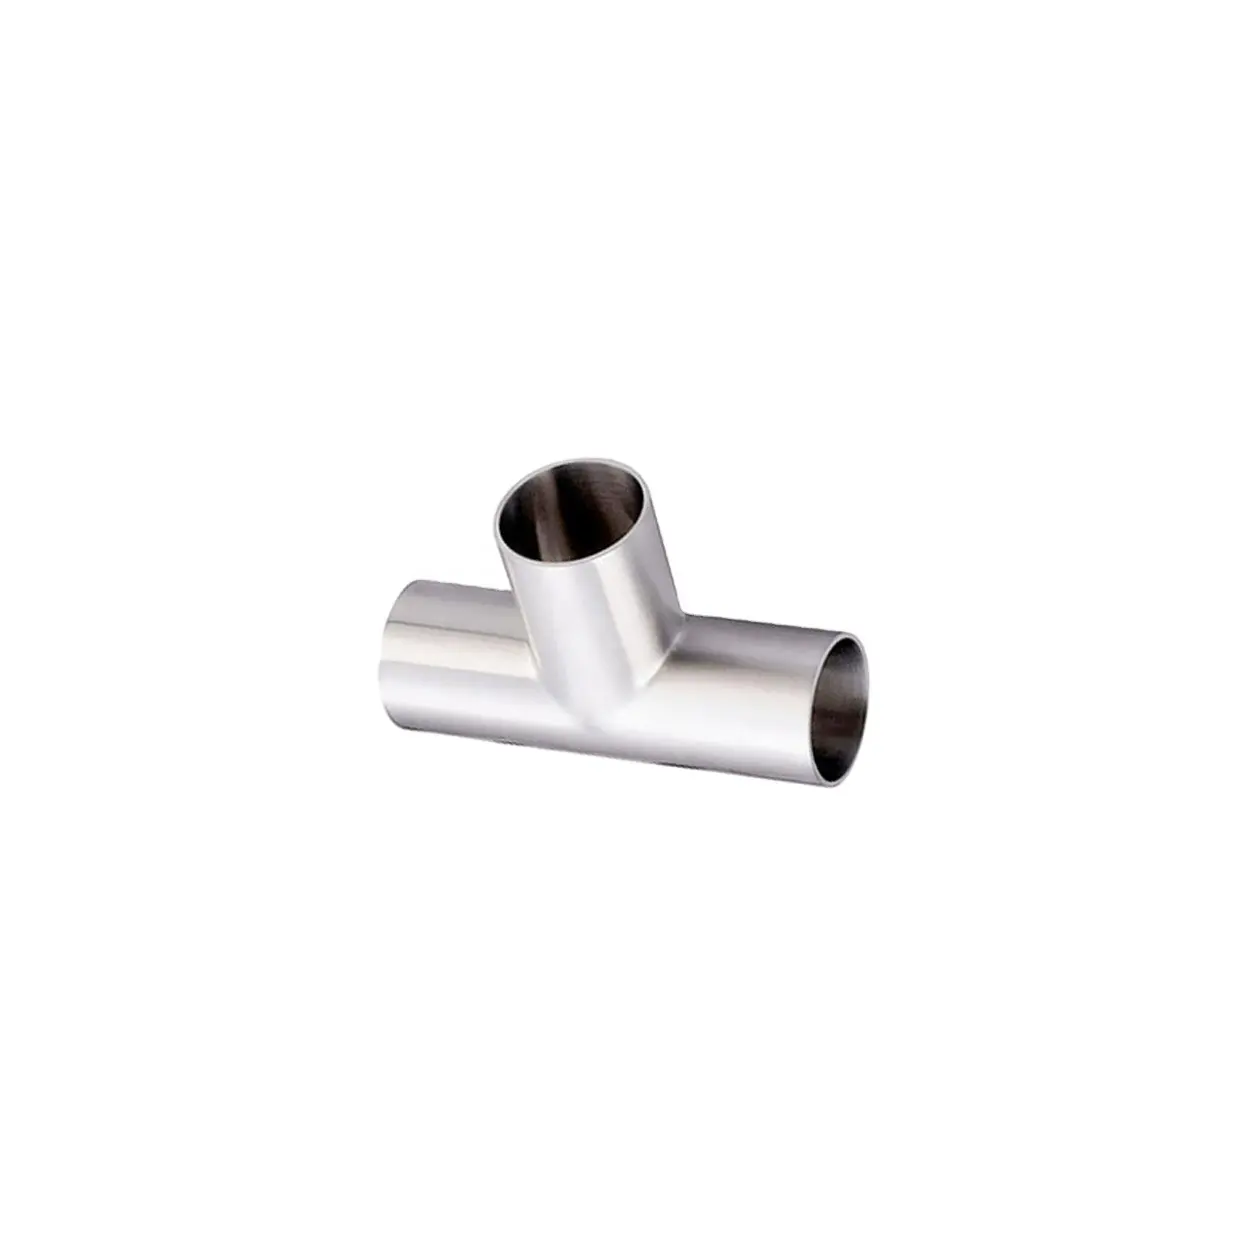 Stainless Steel Sanitary Butt Weld Fittings Eccentric Elbow Tee Pipe Fitting 1/2"-6"